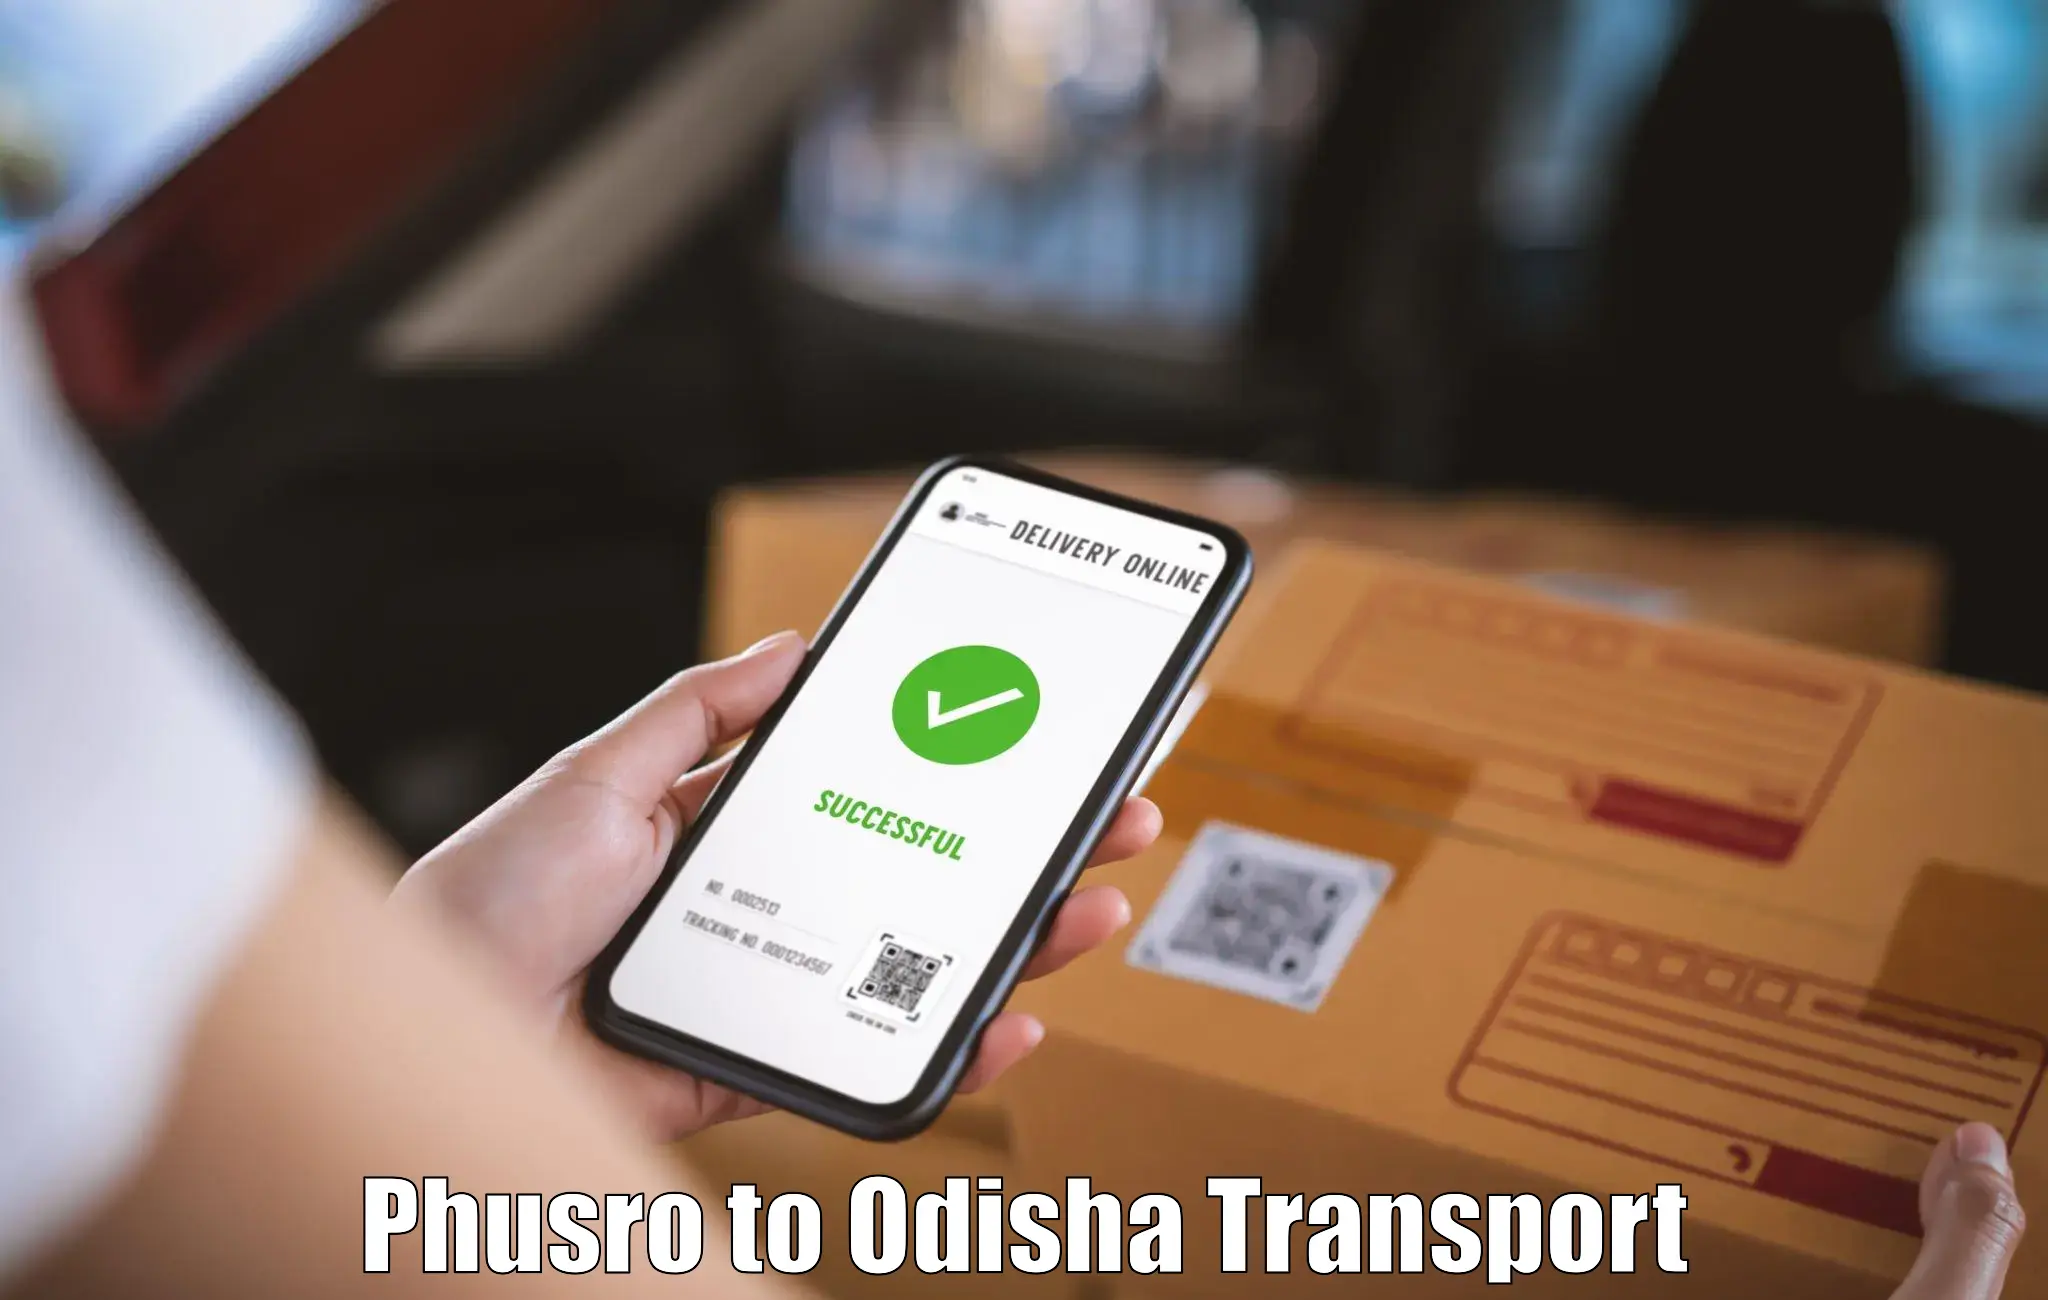 Transport shared services in Phusro to Raighar